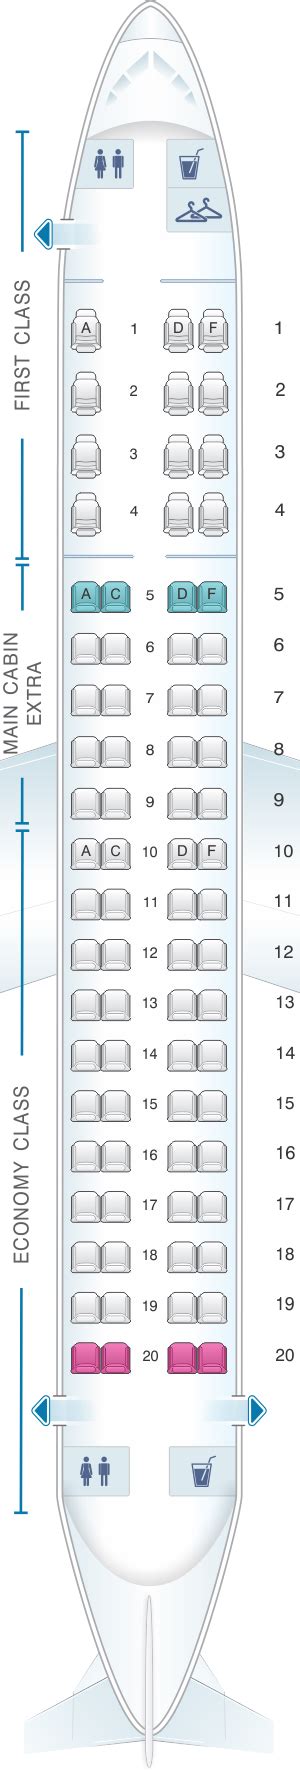 Embraer 175 american seat map. American Airlines Embraer 175 Seat Map; Seat 11f; American Airlines Reviews. Seating Charts · Airbus A319 · Airbus A319 (MCE) · Airbus A320 · Airbus A321 · Airbus A321 (transcon) · Airbus A321 (US Airways) · Airbus A330-200 · Airbus A330-300 · Boeing 737 MAX 8 · Boeing 737-800 · Boeing 737-800 (New MCE) · Boeing 757-200 · Boeing ... 